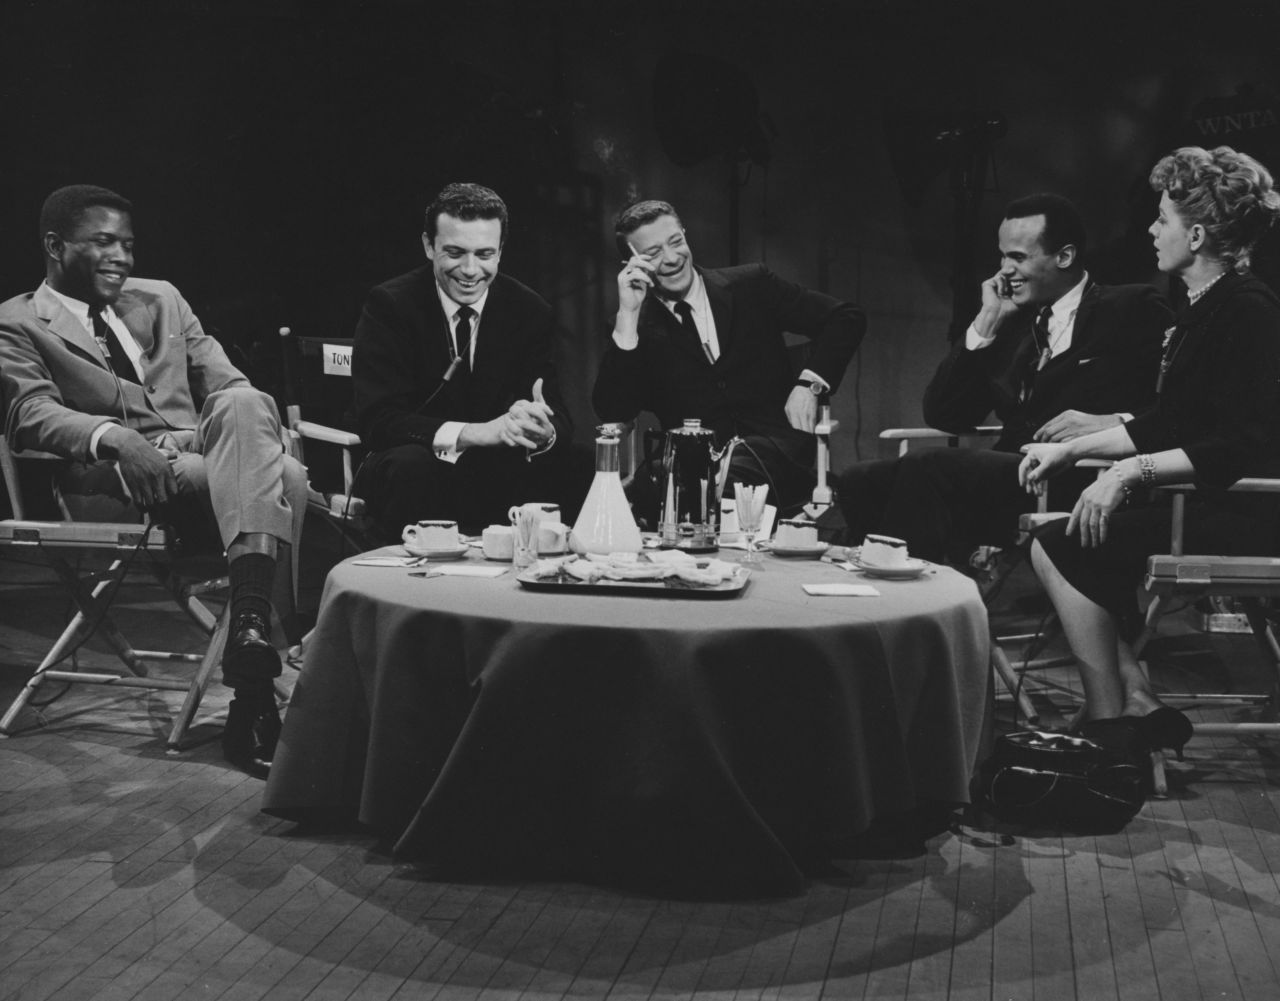 Poitier appears on the talk show "Open End" with actor Tony Franciosa, host David Susskind, singer and actor Harry Belafonte and actress Shelley Winters.